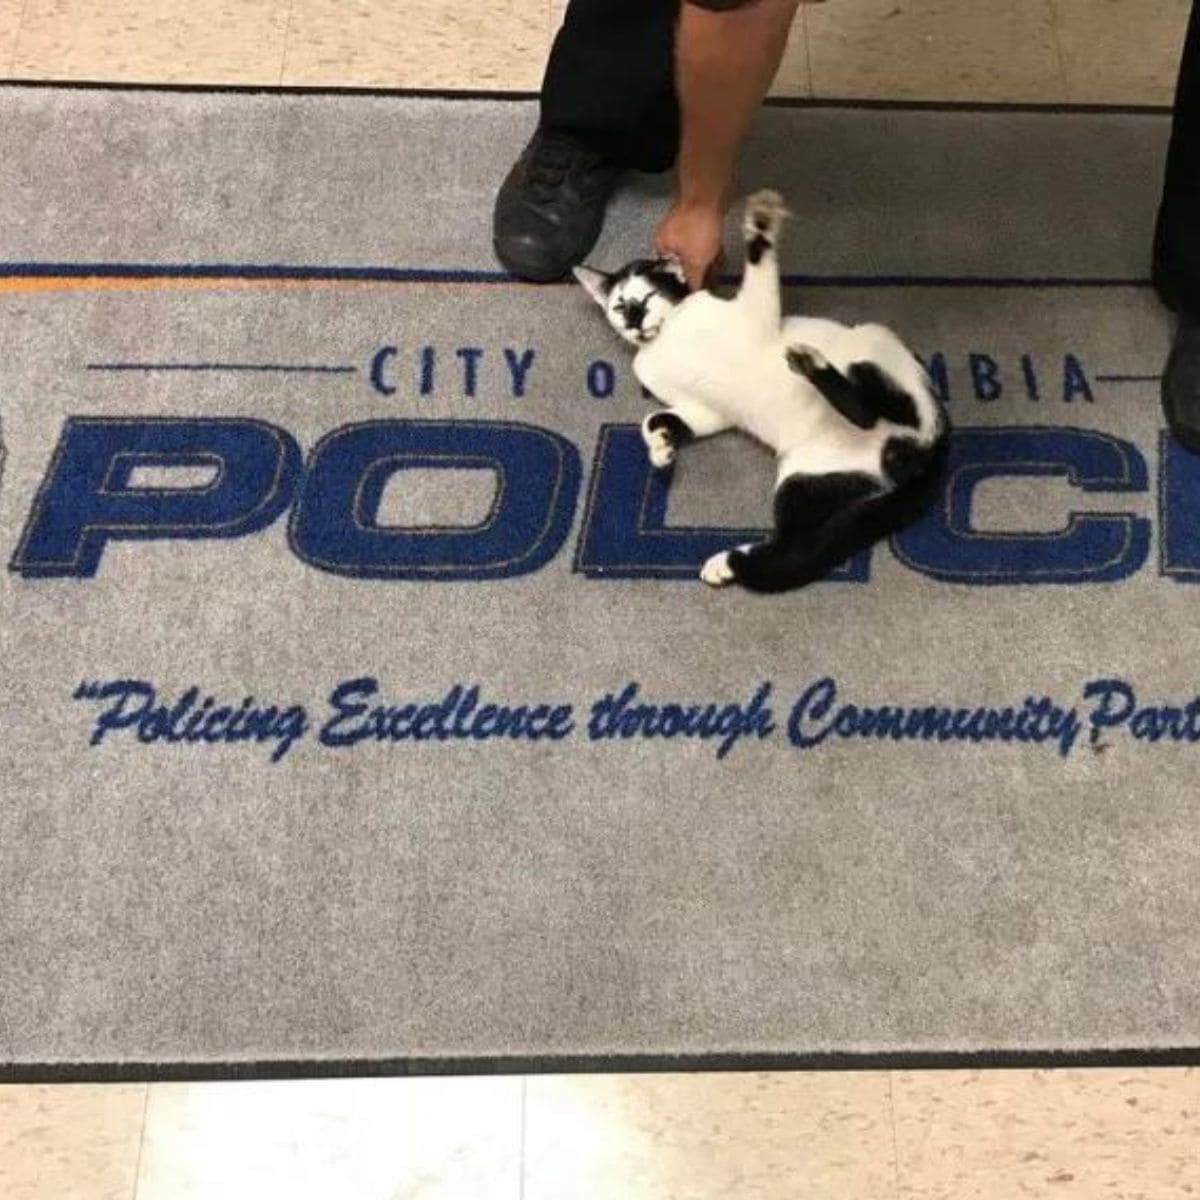 the cat is lying on the police carpet while the policeman is petting it